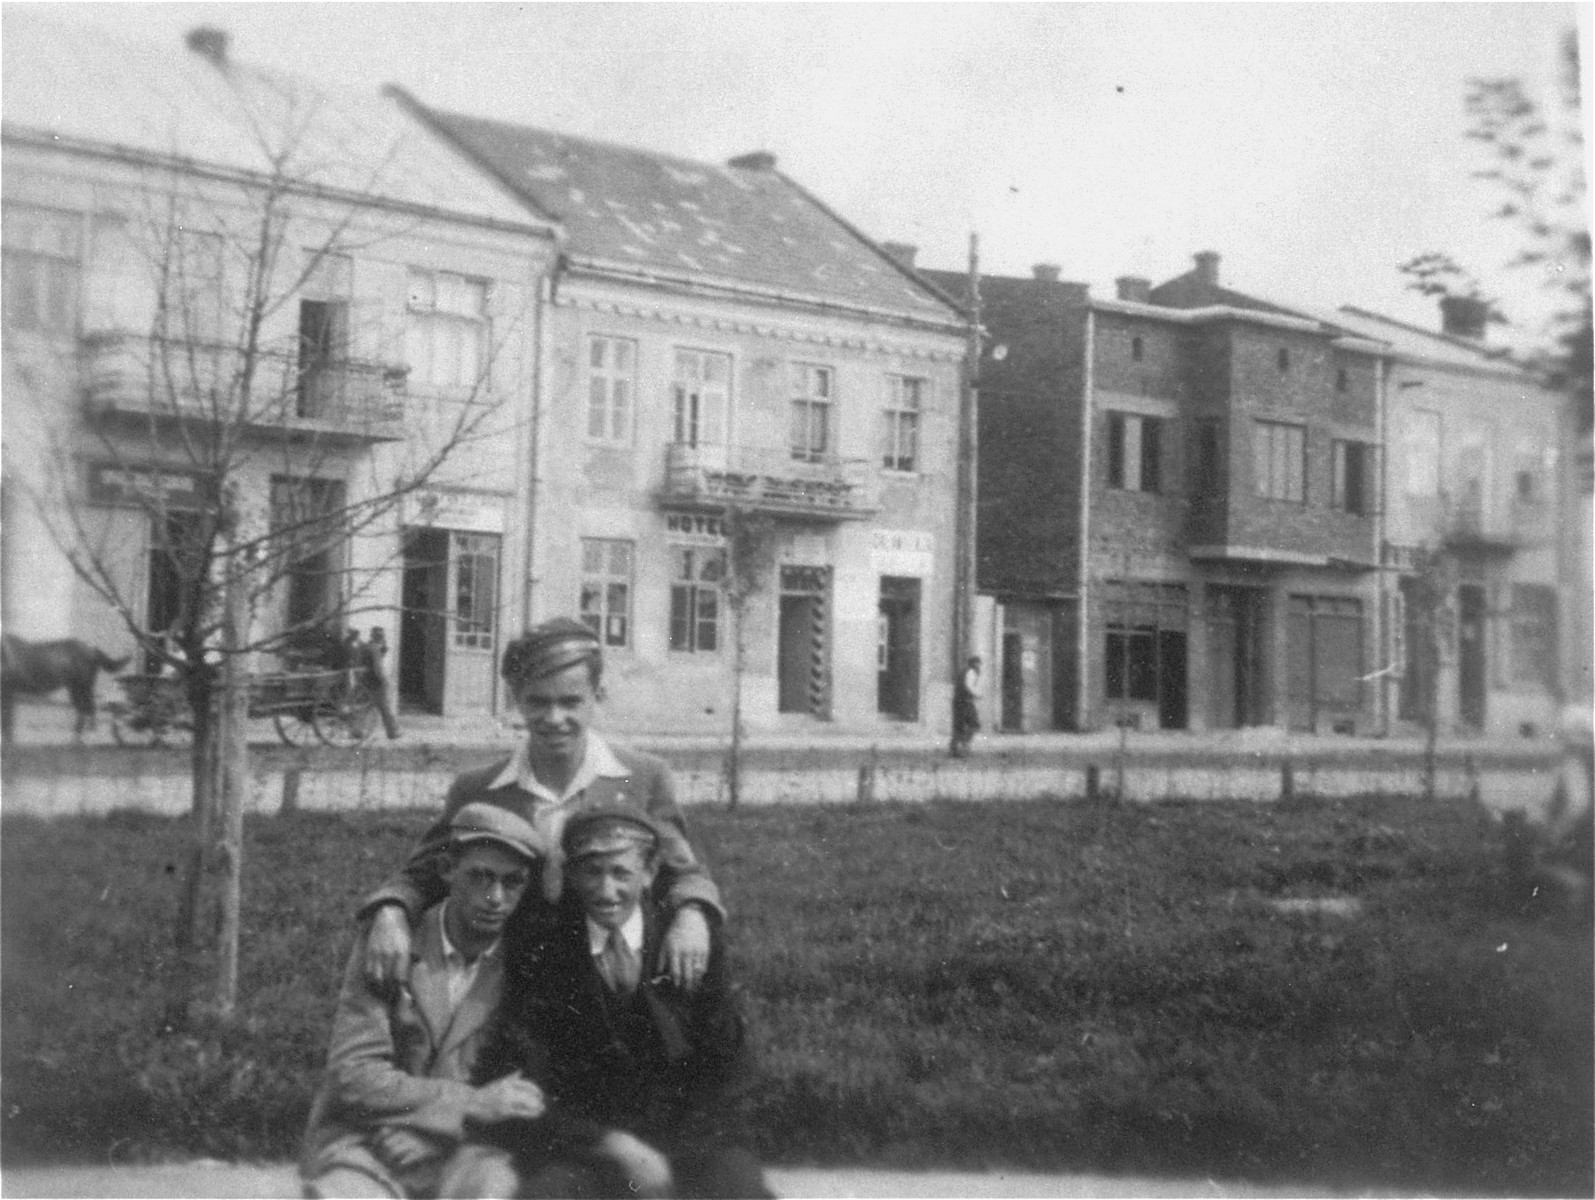 Joshua Heilman with two friends in the center of Lubaczow.